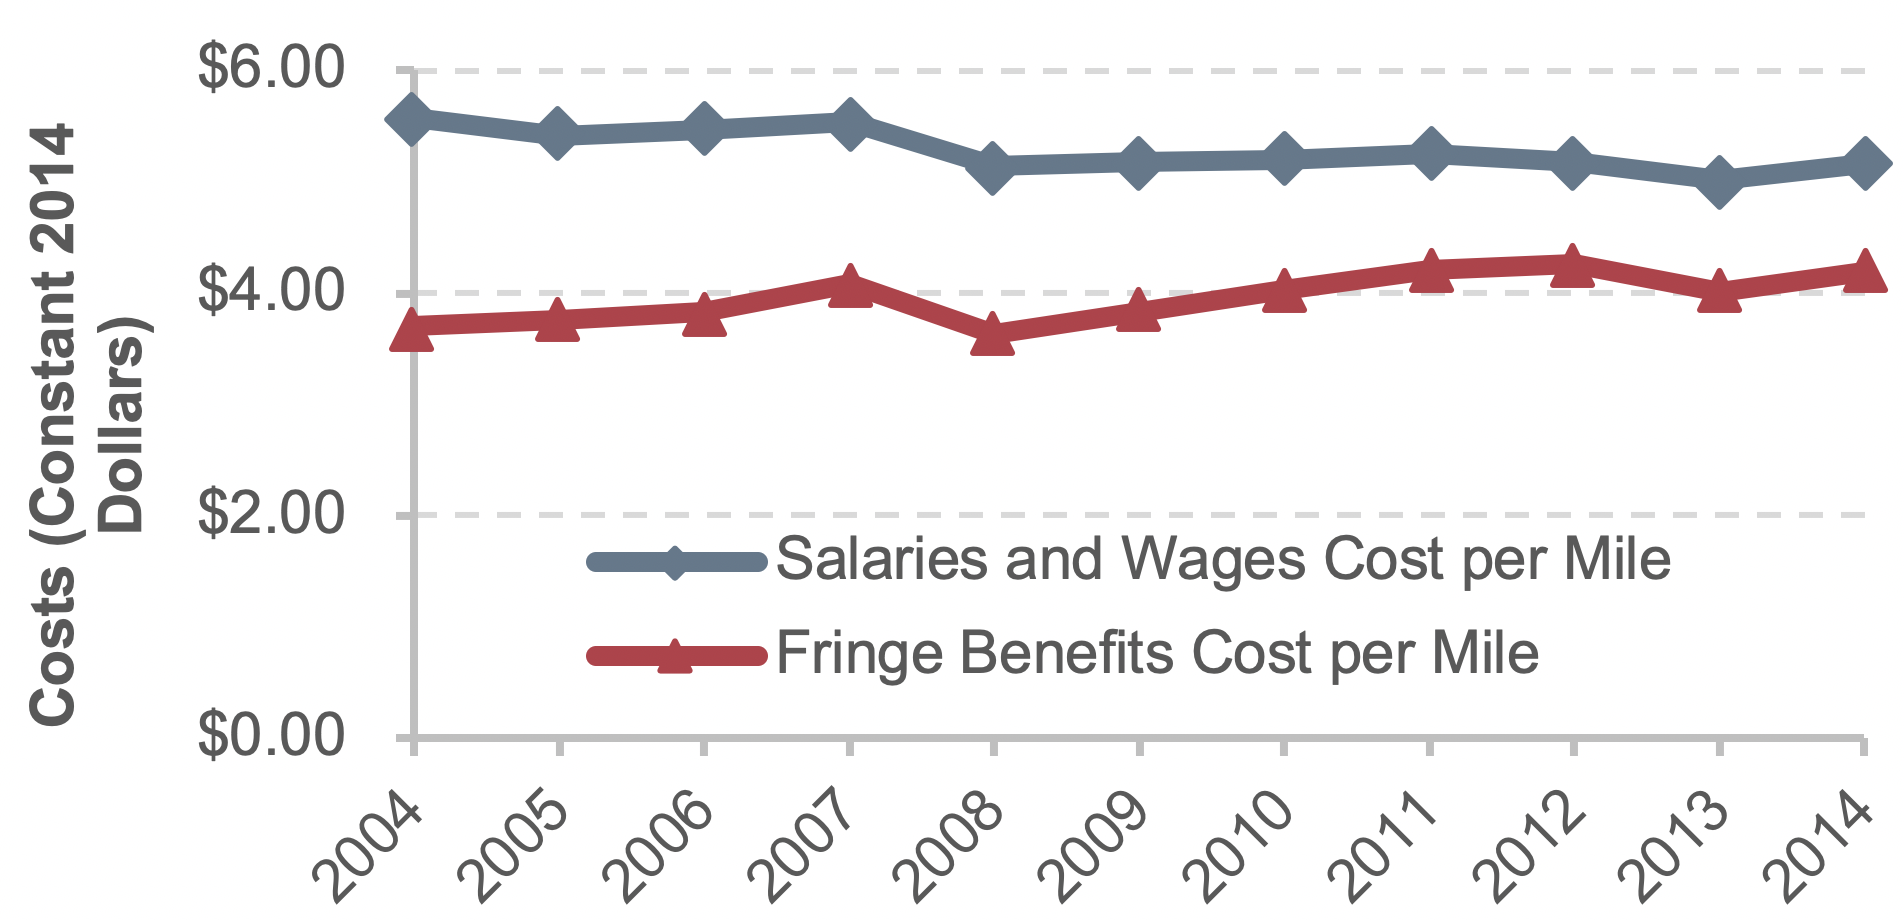 Line chart shows average cost per mile for salaries and wages and fringe benefits from 2004 to 2014 in constant 2014 dollars. For salaries and wages, average cost per mile was $5.57 in 2004. Cost dipped to $5.42 in 2005 and then rose to $5.54 in 2007. Cost dropped to $5.14 in 2008 and remained roughly at this value through 2012, before dropping to $5.02 in 2013 and rising to a final value of $5.16 in 2014. For fringe benefits, average cost per mile was $3.70 in 2004, increasing steadily to reach $4.09 in 2007. In 2008, cost dropped to $3.64 before trending back upward to $4.26 in 2012. Cost decreased in 2013 to $4.02 before rising to a final value of $4.19 in 2014. Source: National Transit Database.